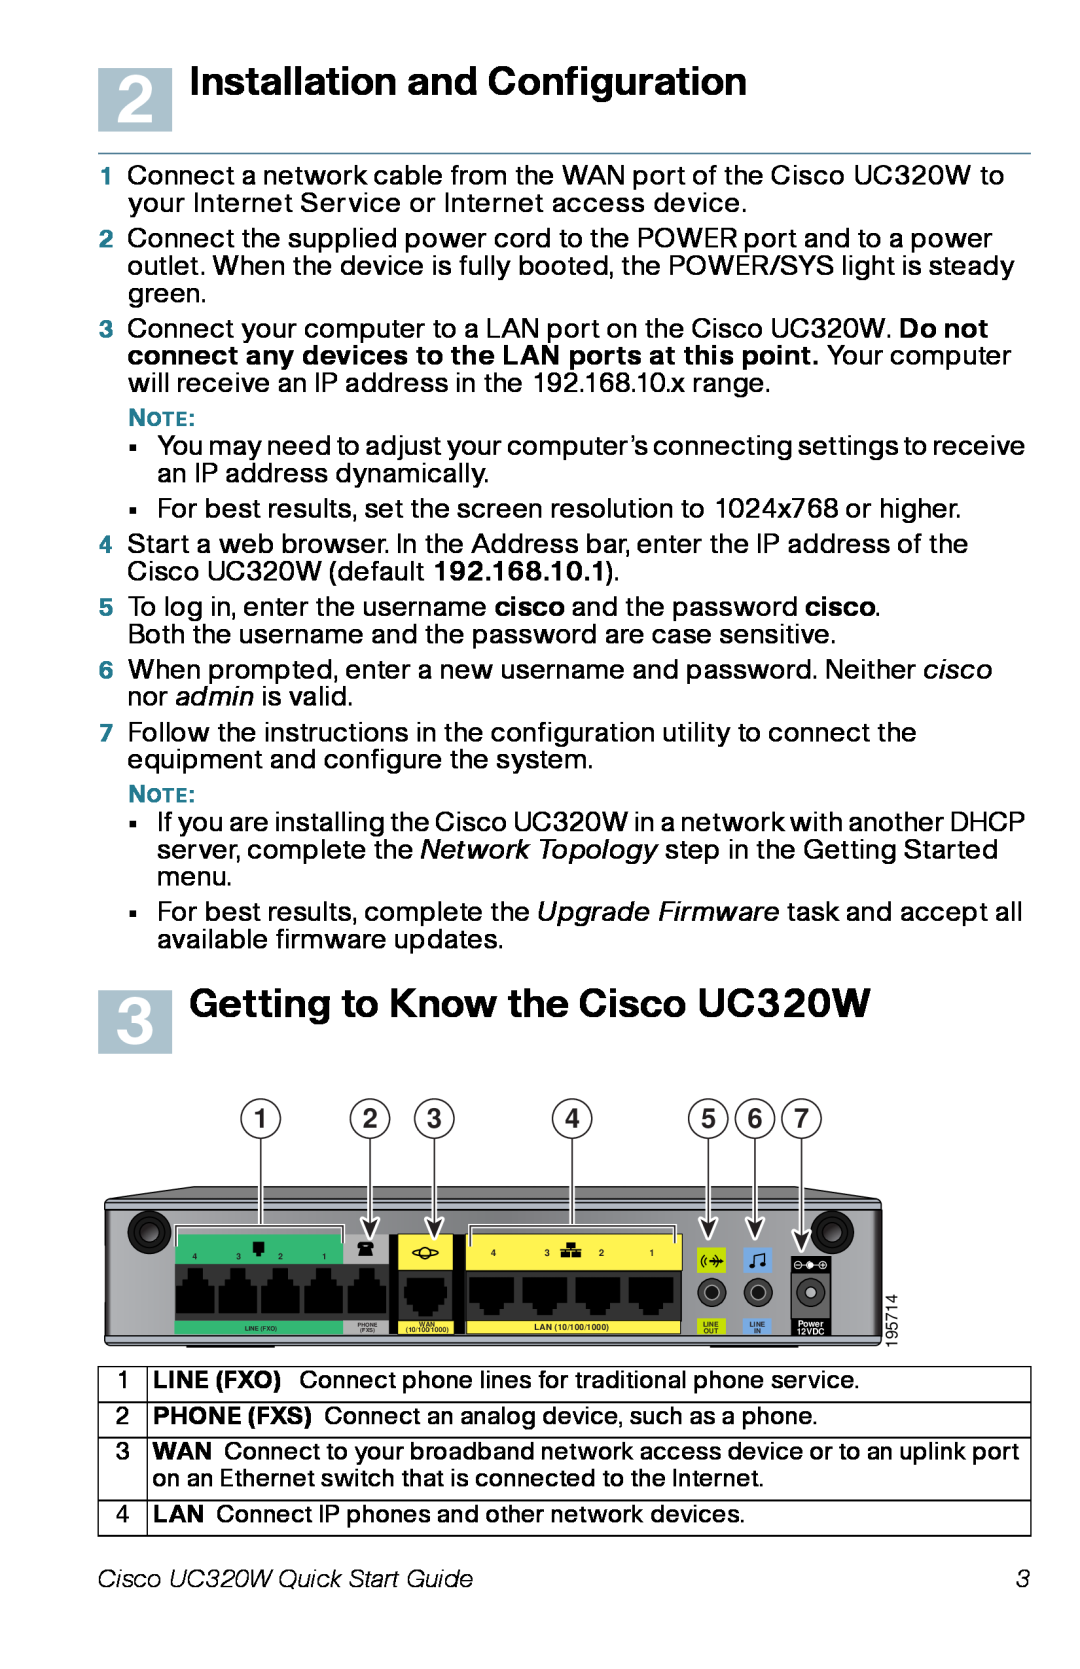 Cisco Systems quick start Installation and Configuration, Getting to Know the Cisco UC320W 